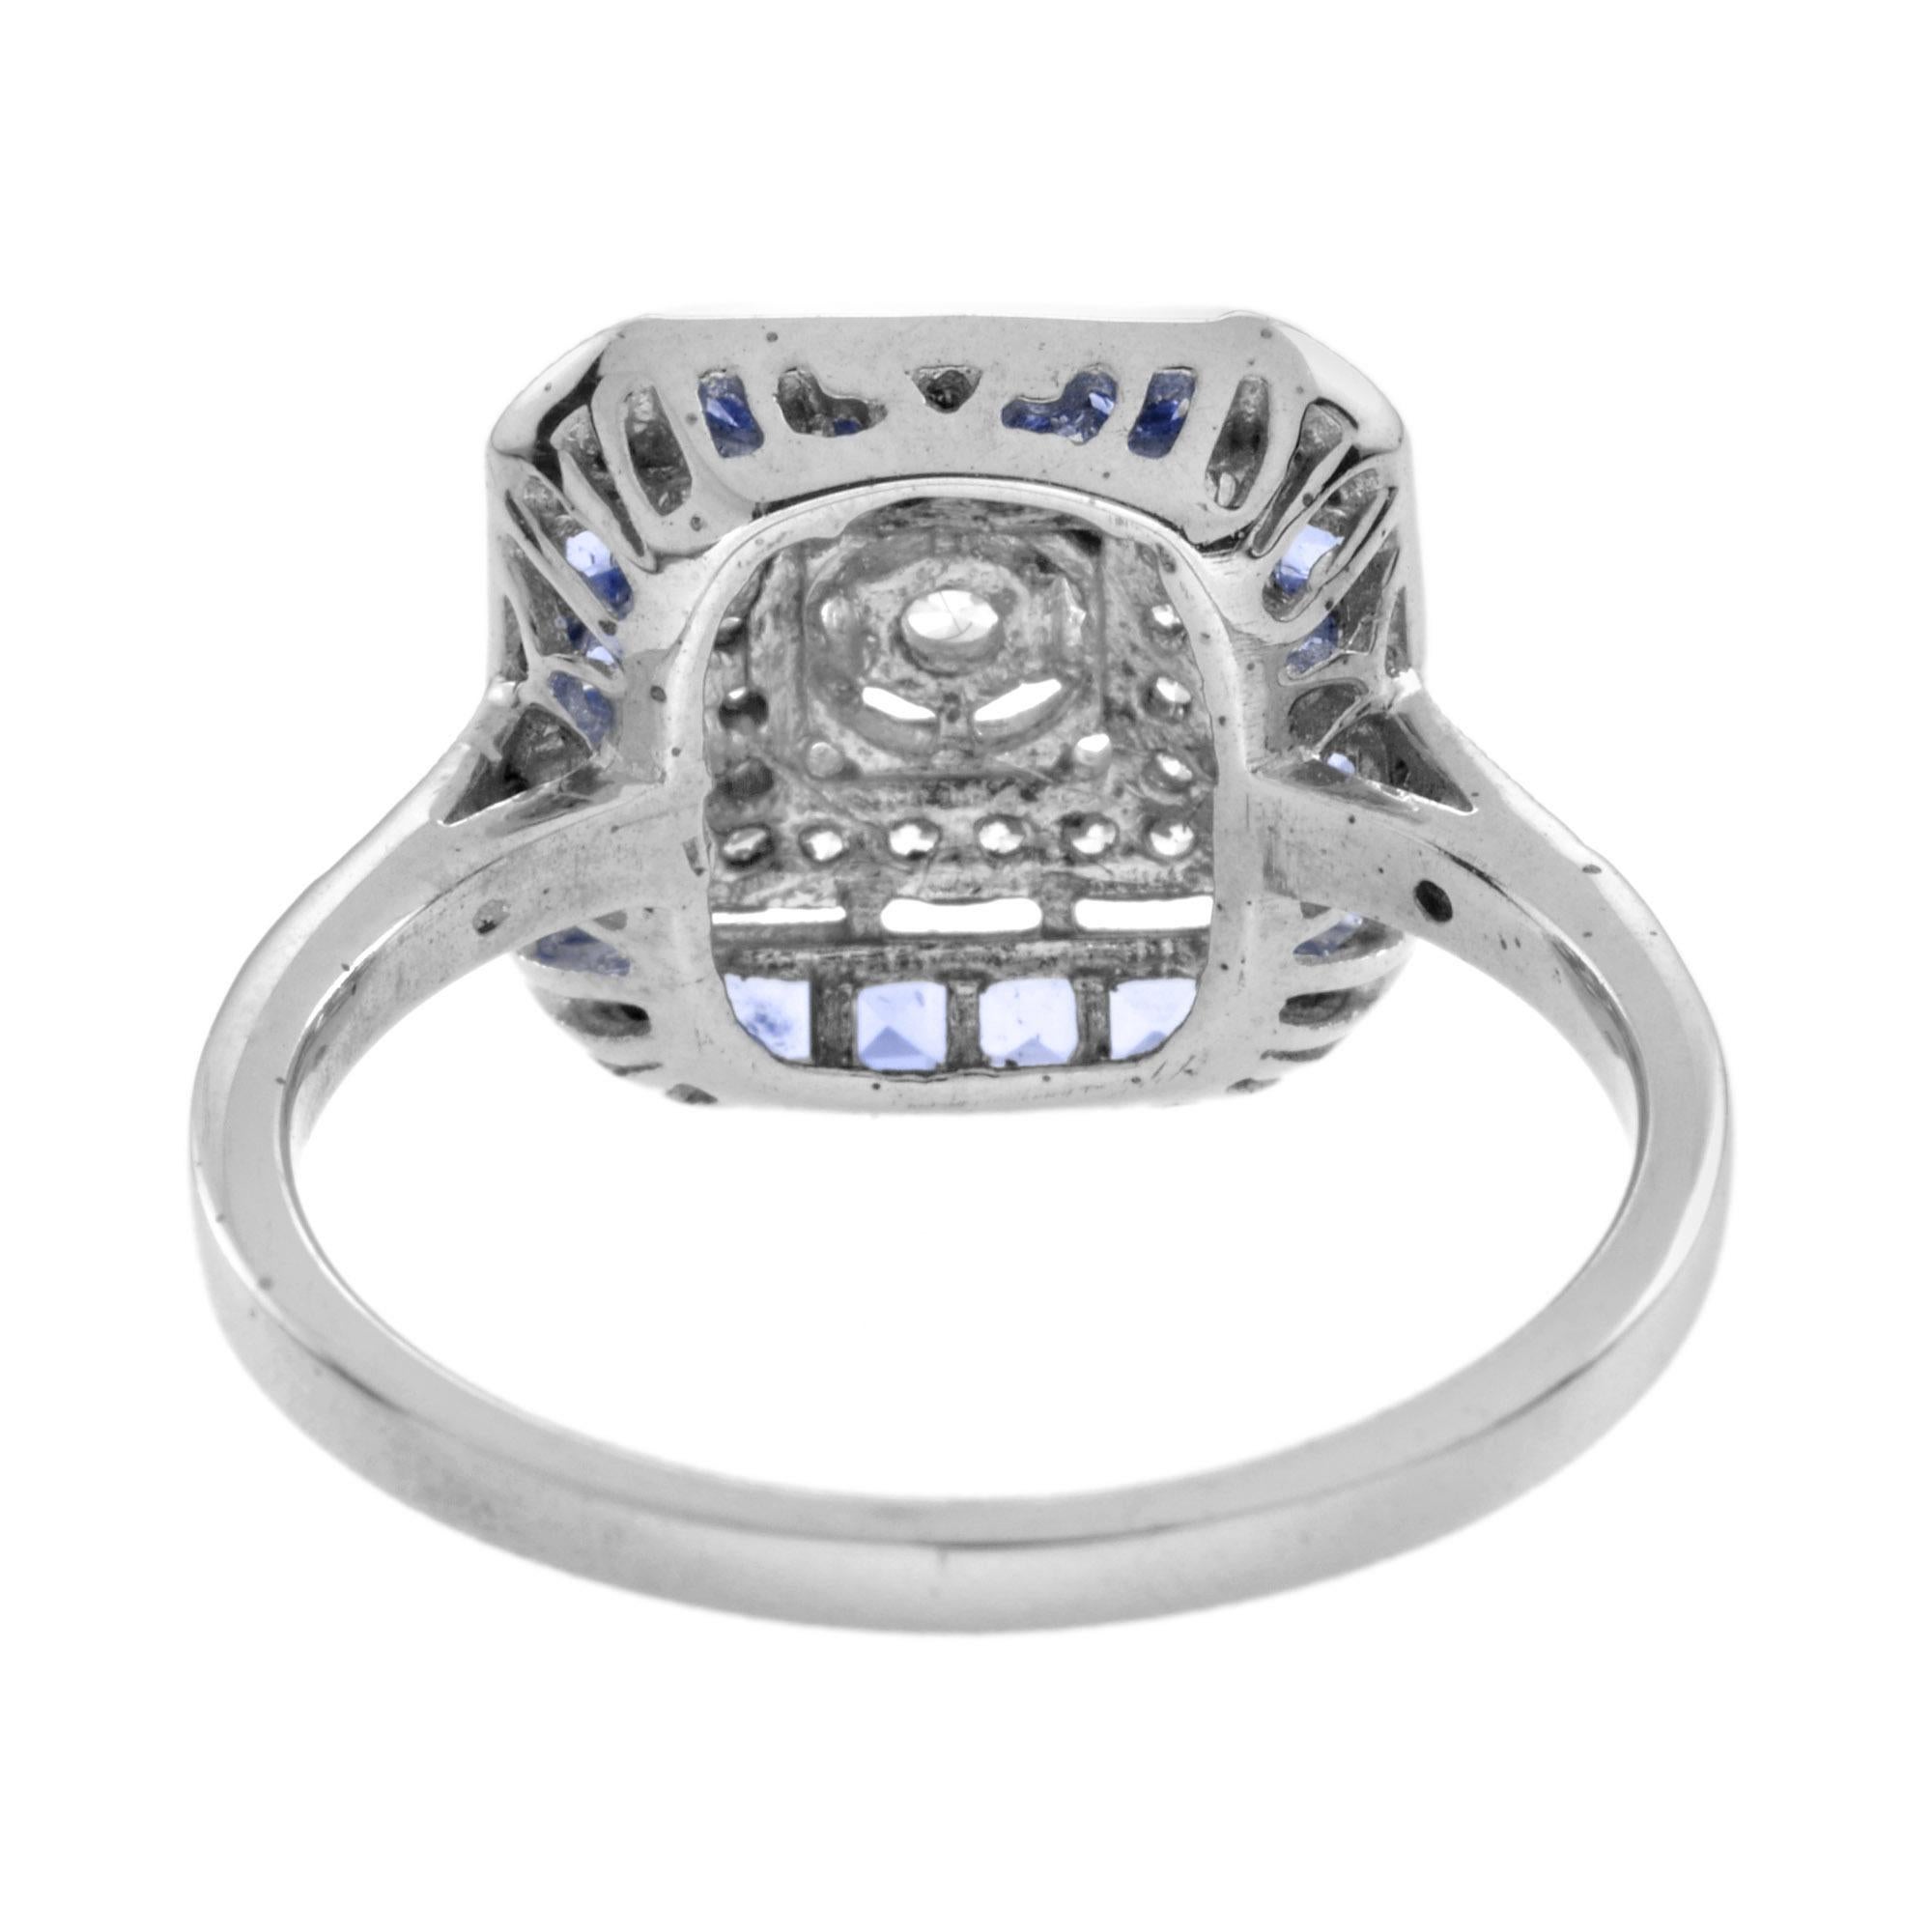 For Sale:  Diamond and Sapphire Art Deco Style Engagement Ring in 14K White Gold 4